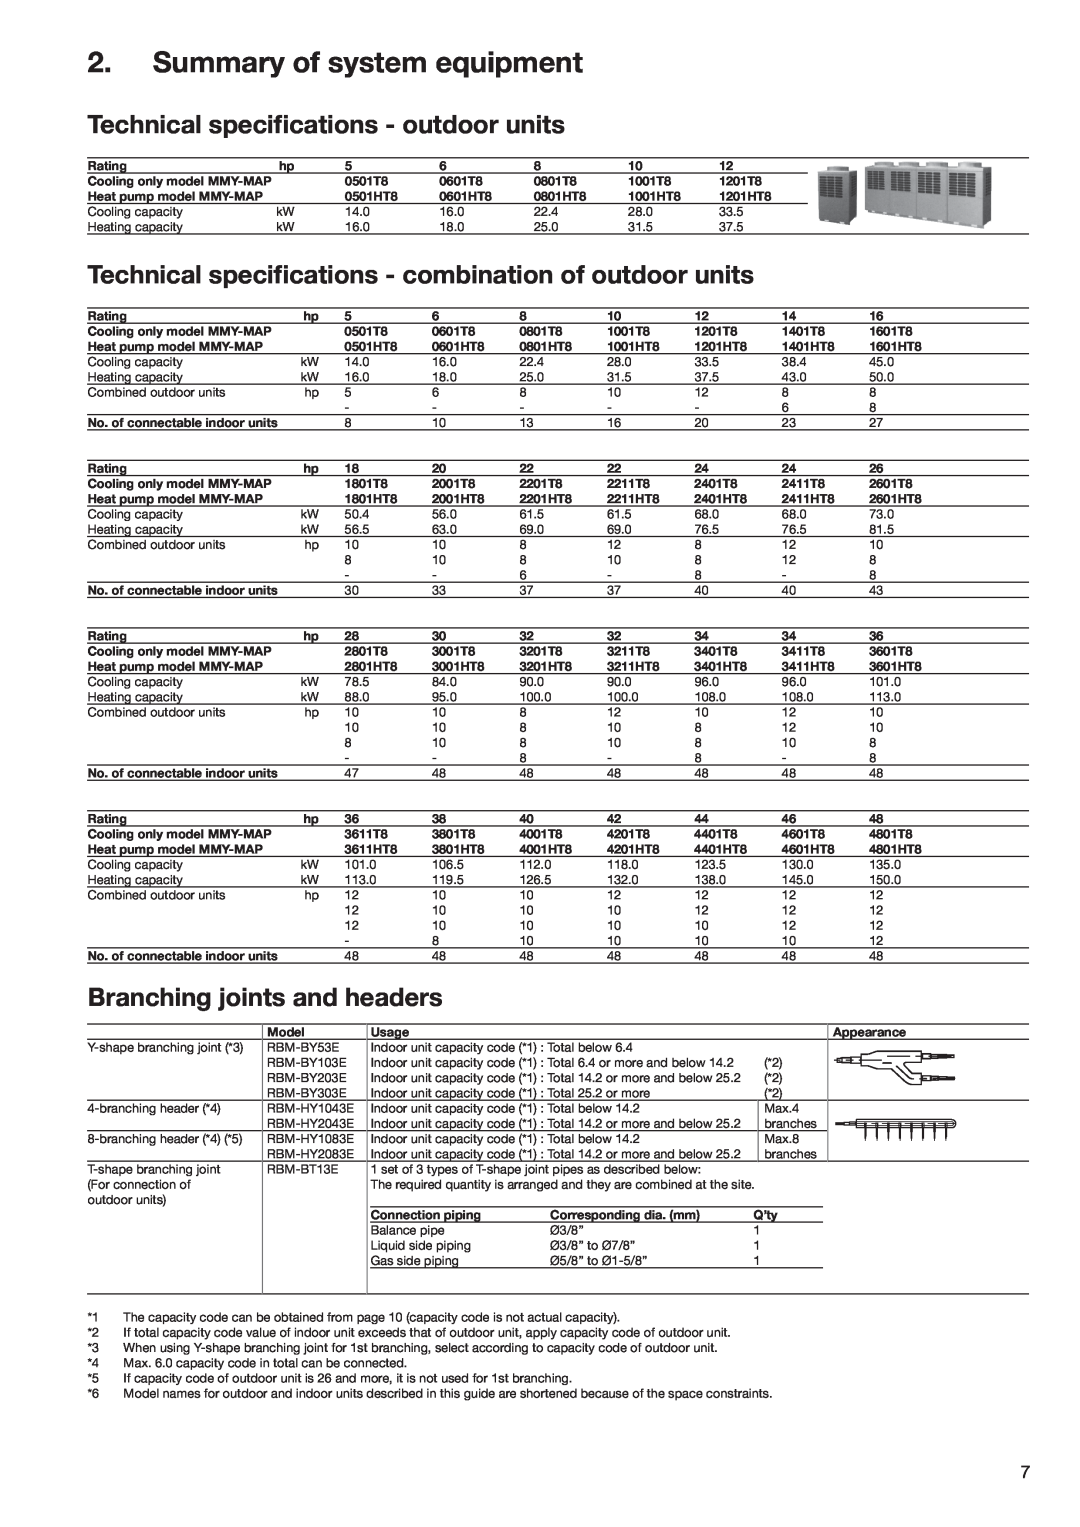 Toshiba HFC R-410A Summary of system equipment, Technical speciﬁcations - outdoor units, Branching joints and headers 